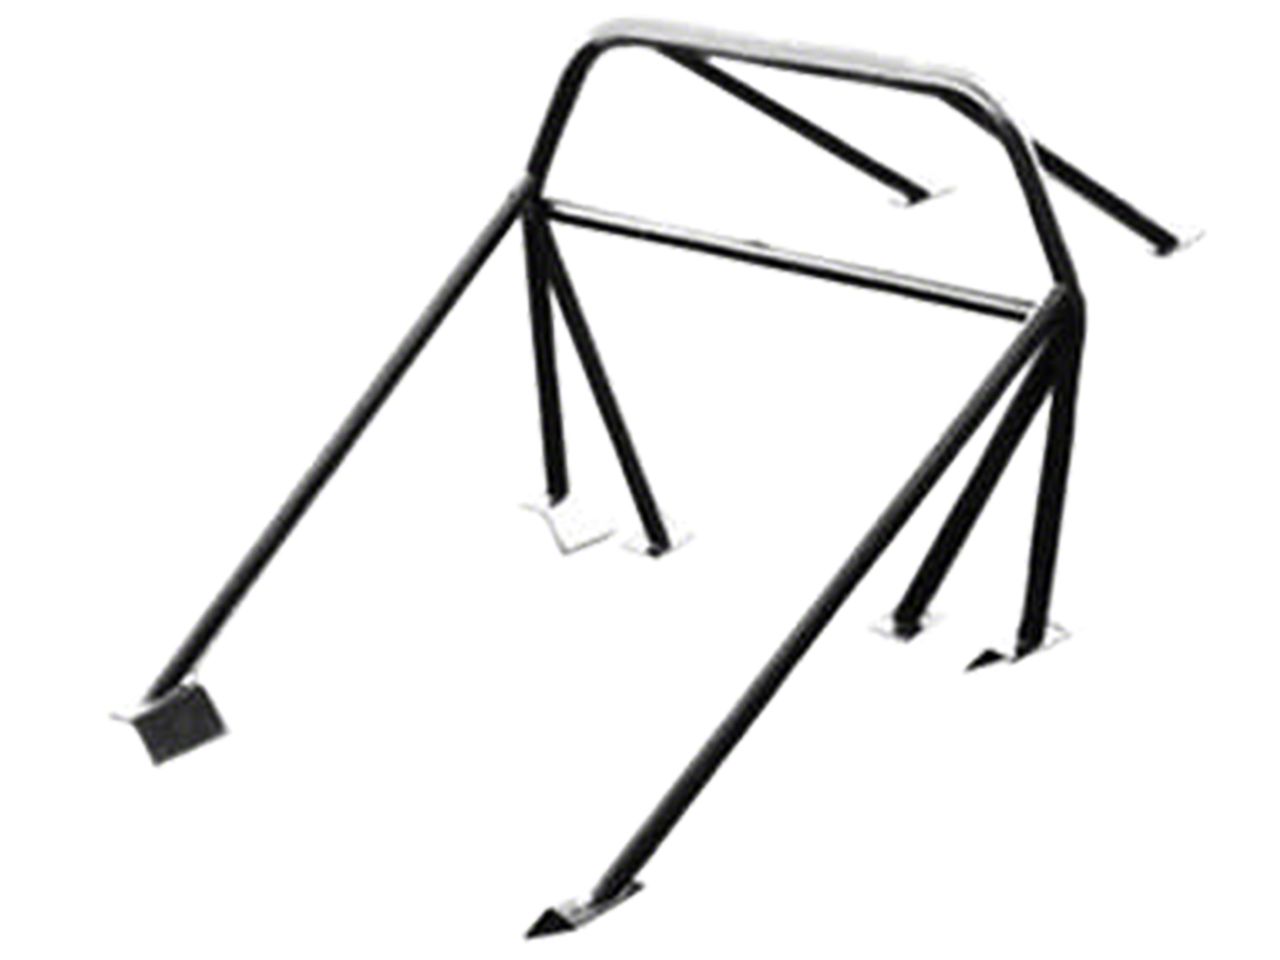 Corvette Roll Bars & Roll Cages 1968-1982